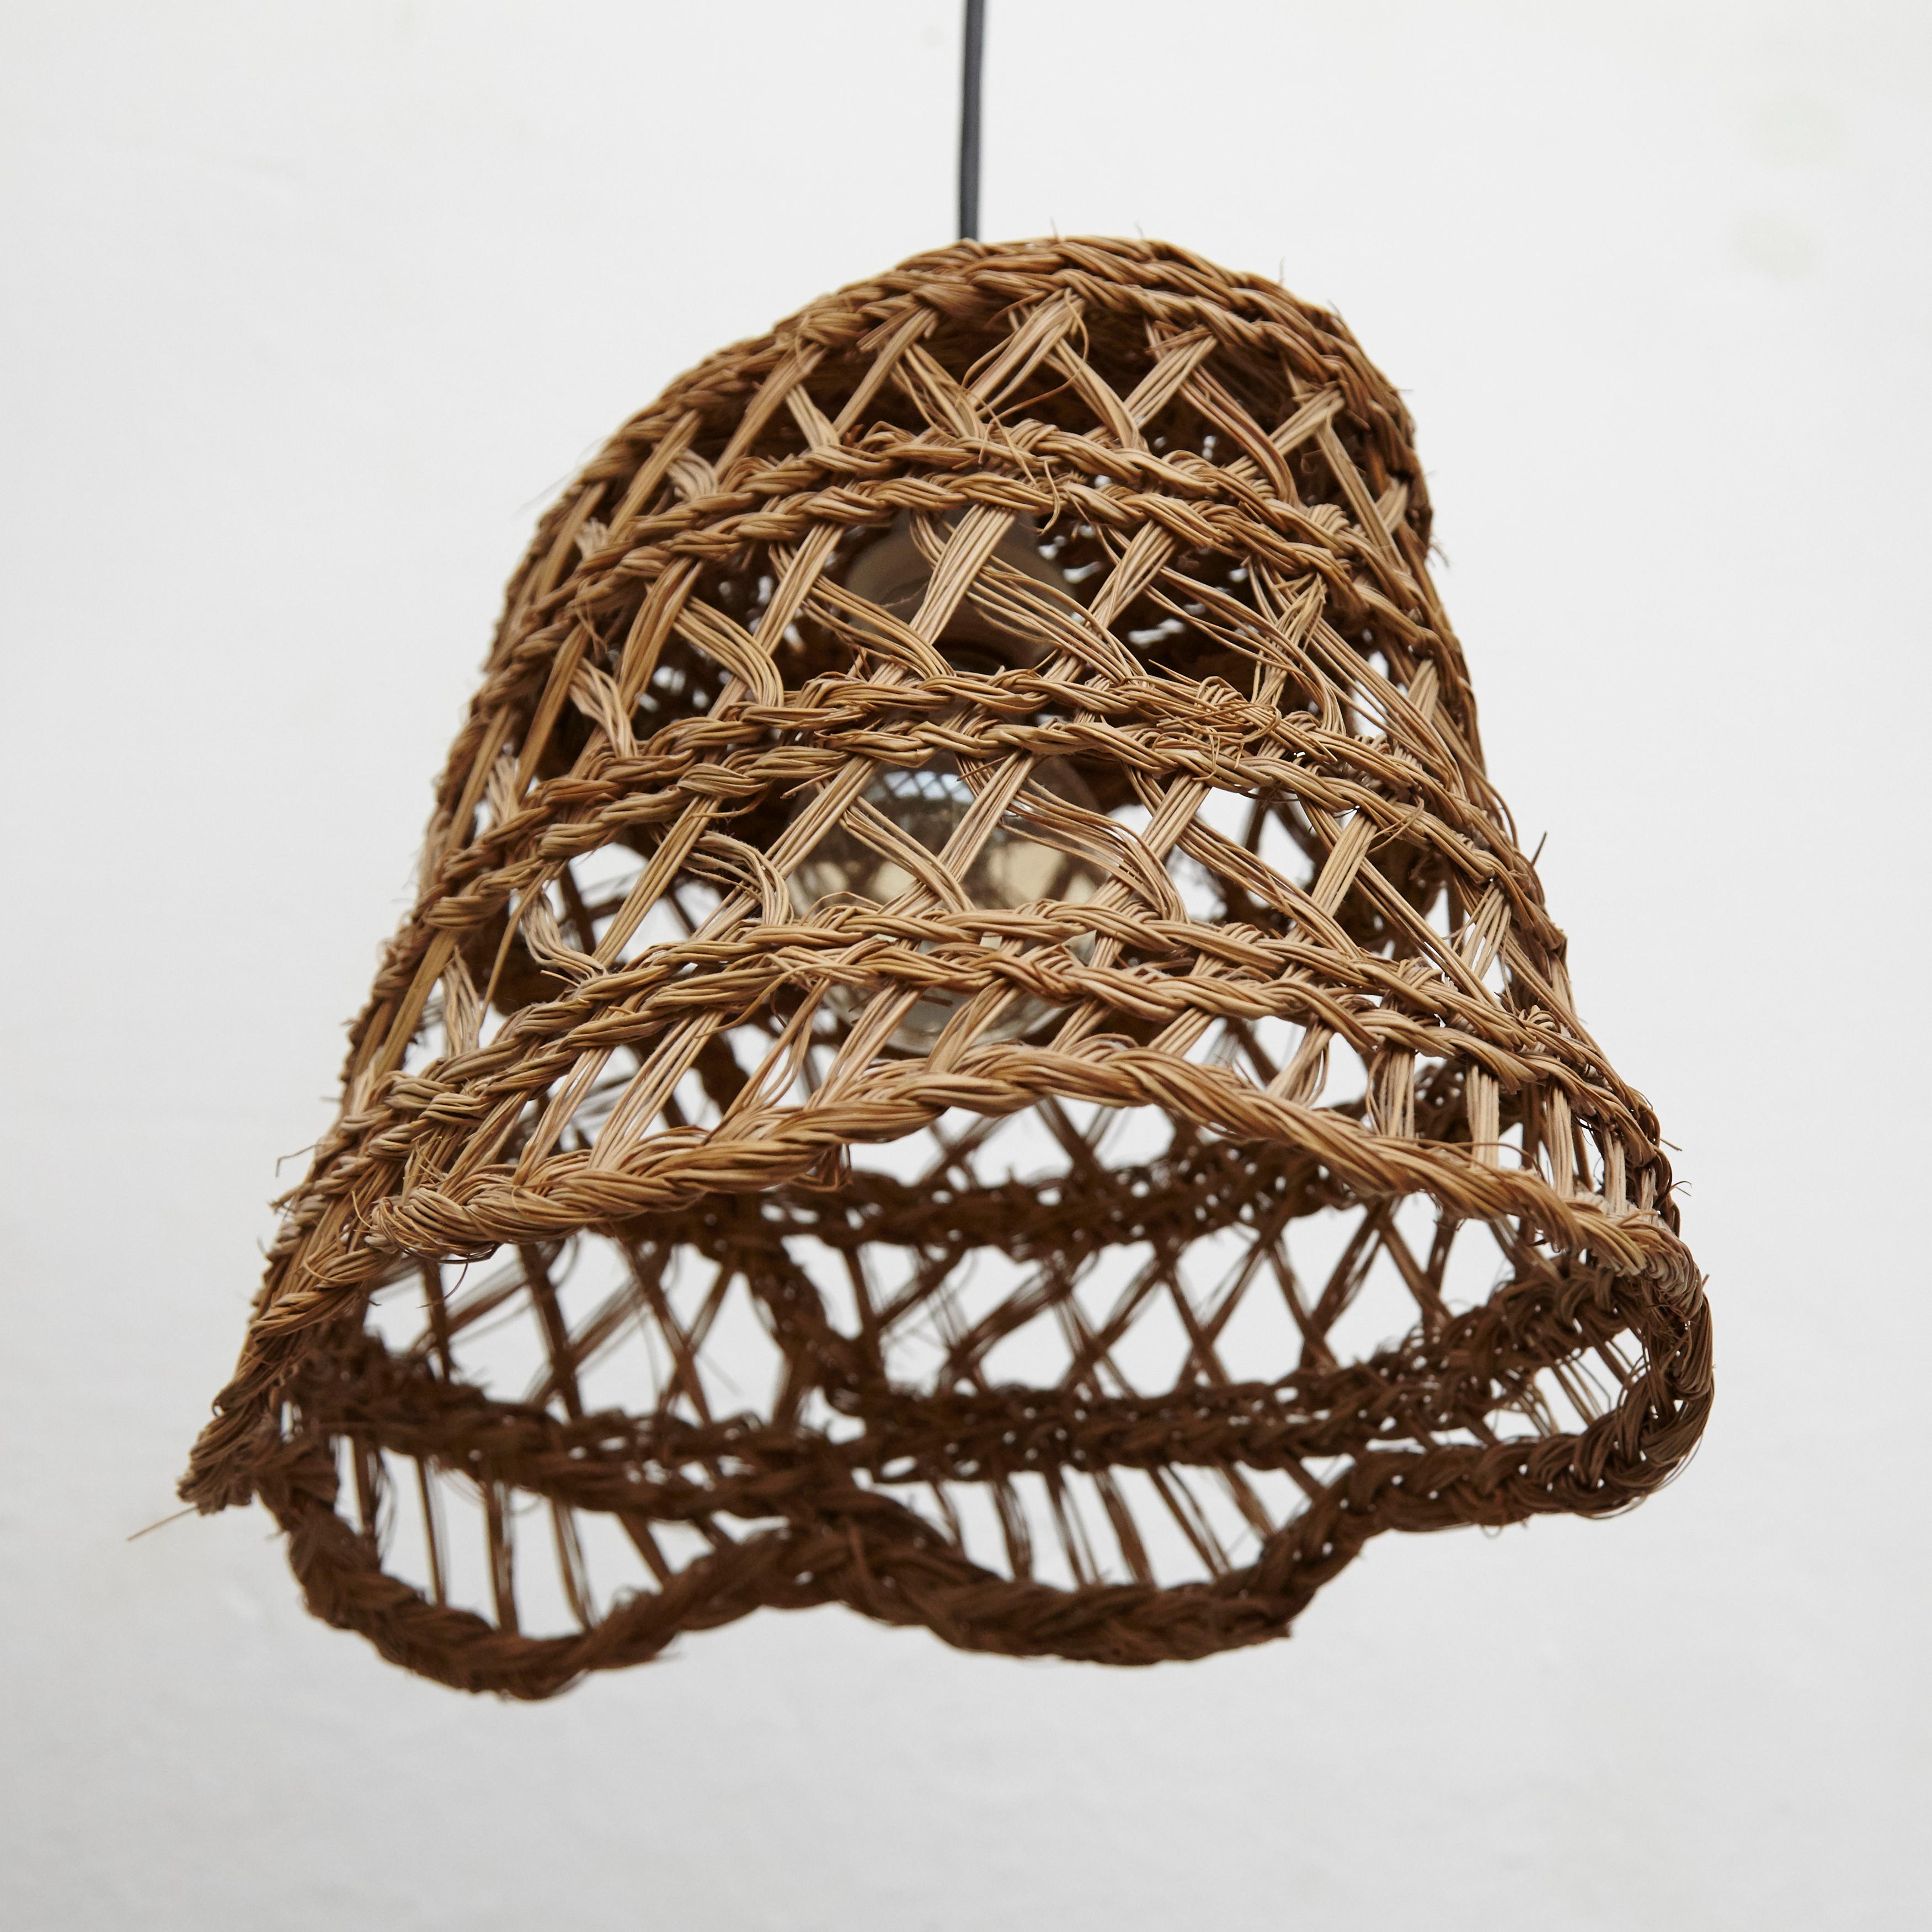 Rustic traditional rattan ceiling lamp by unknown artisan, Spain, circa 1980.
In original condition, with minor wear consistent with age and use, preserving a beautiful patina.

Materials:
Rattan

Dimensions:
D 30 cm x W 37 cm x H 24